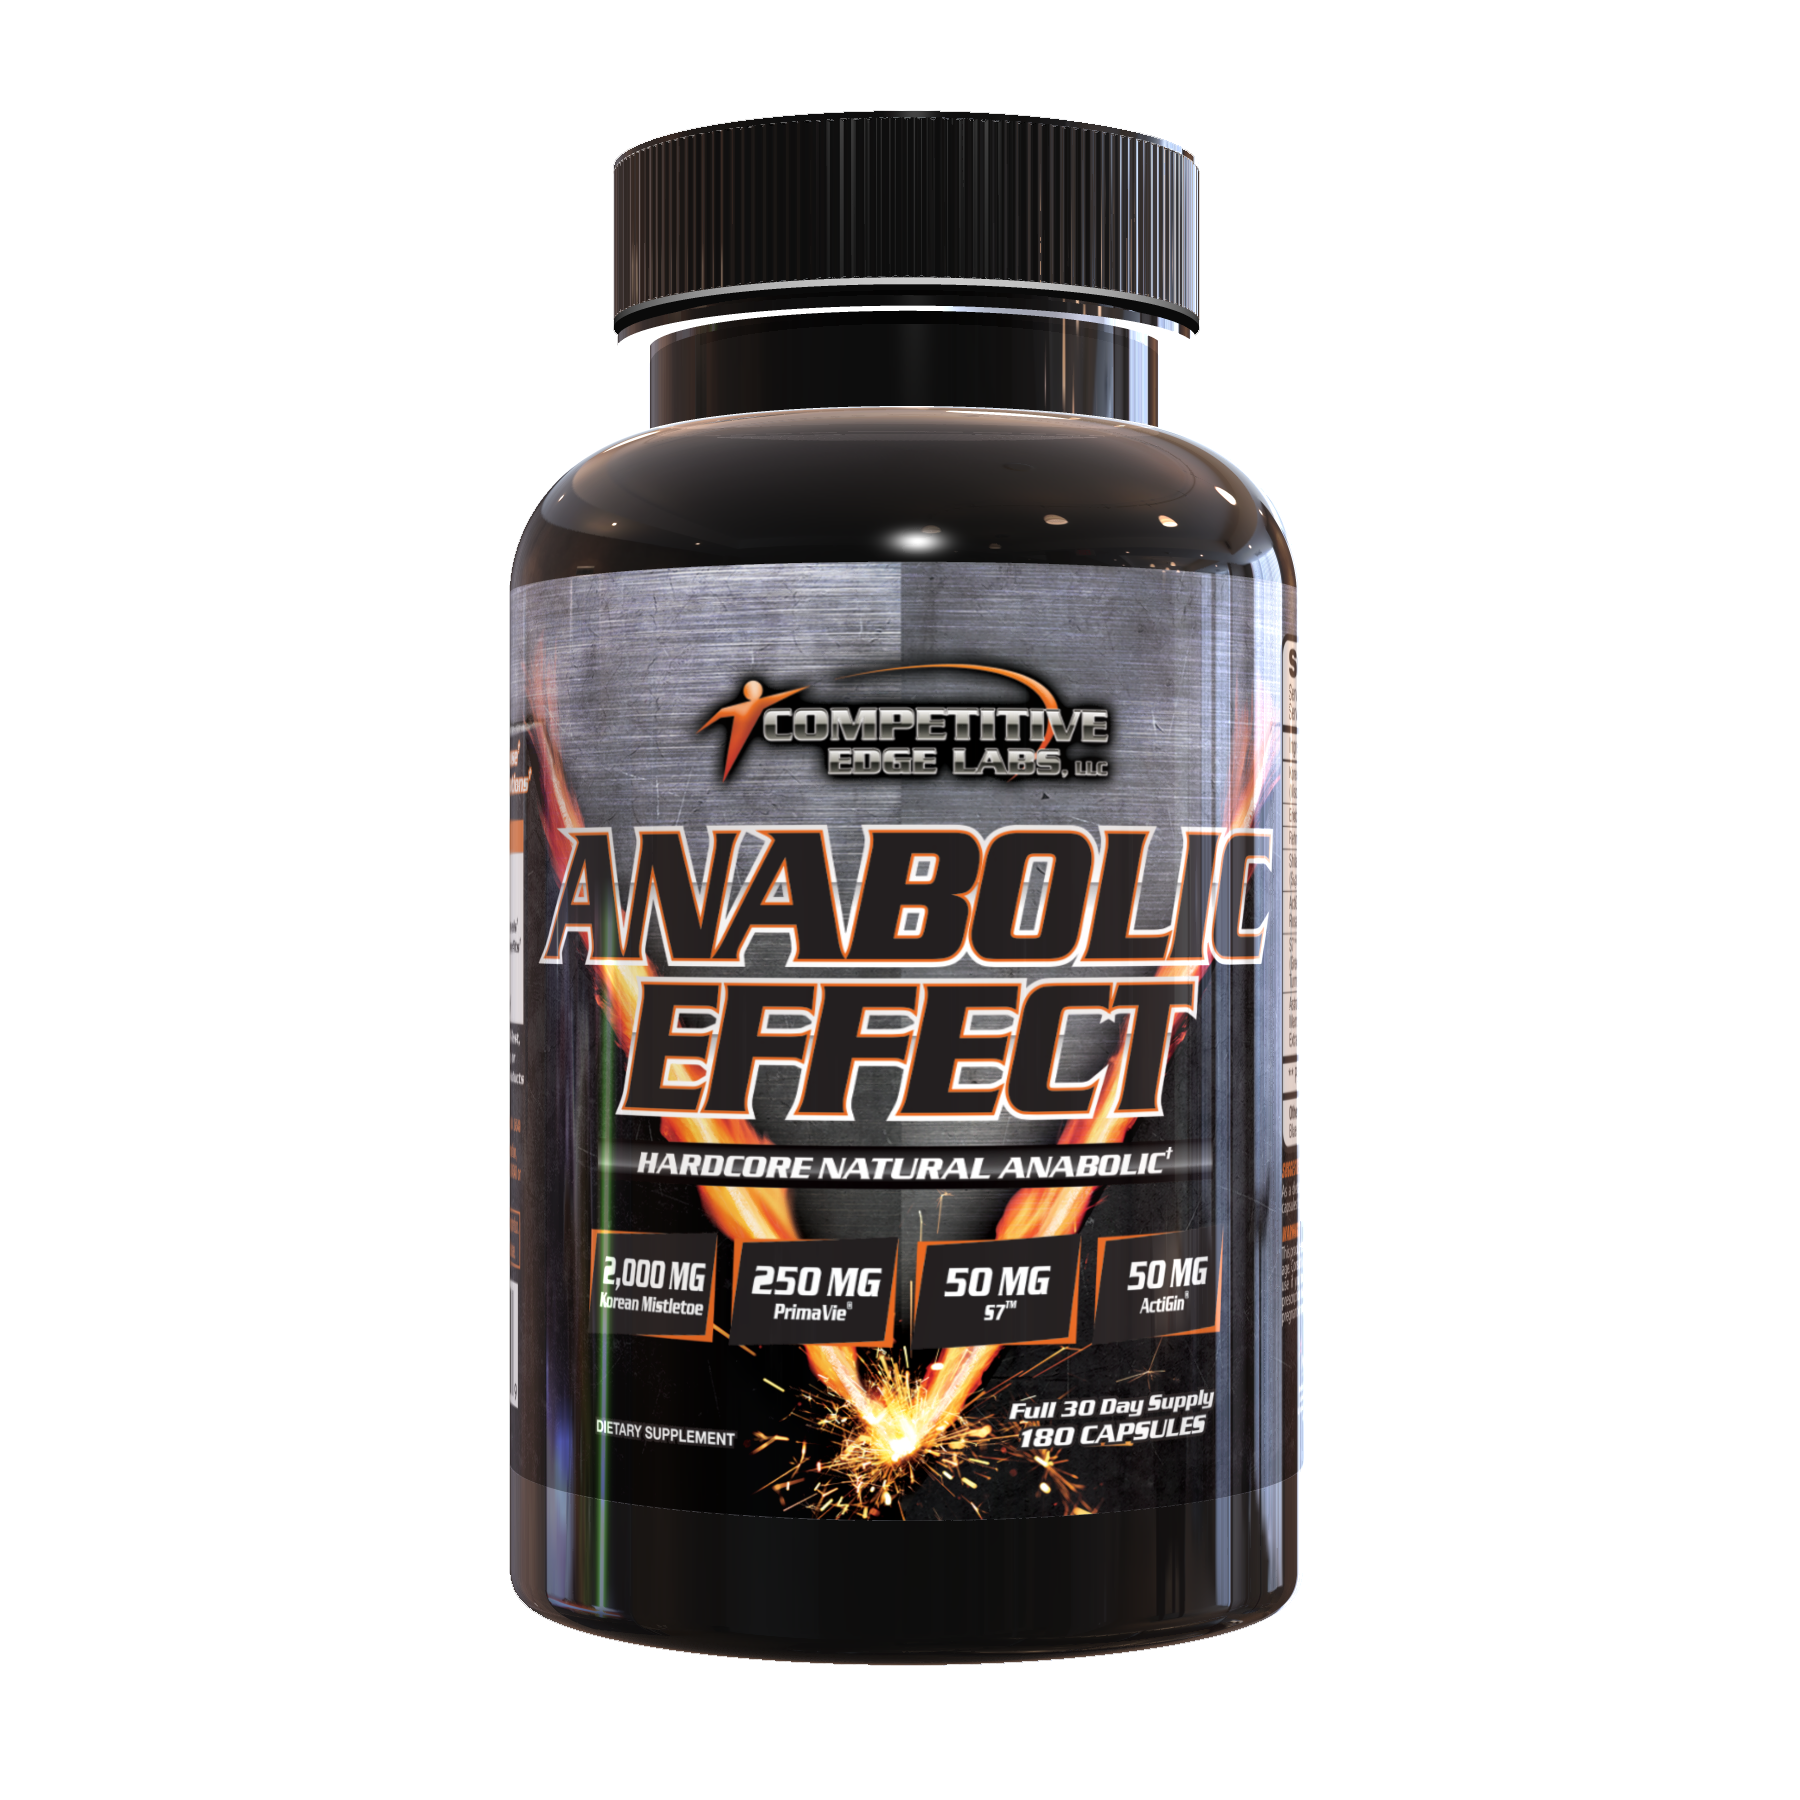 Anabolic Effect - Competitive Edge Labs, LLC.